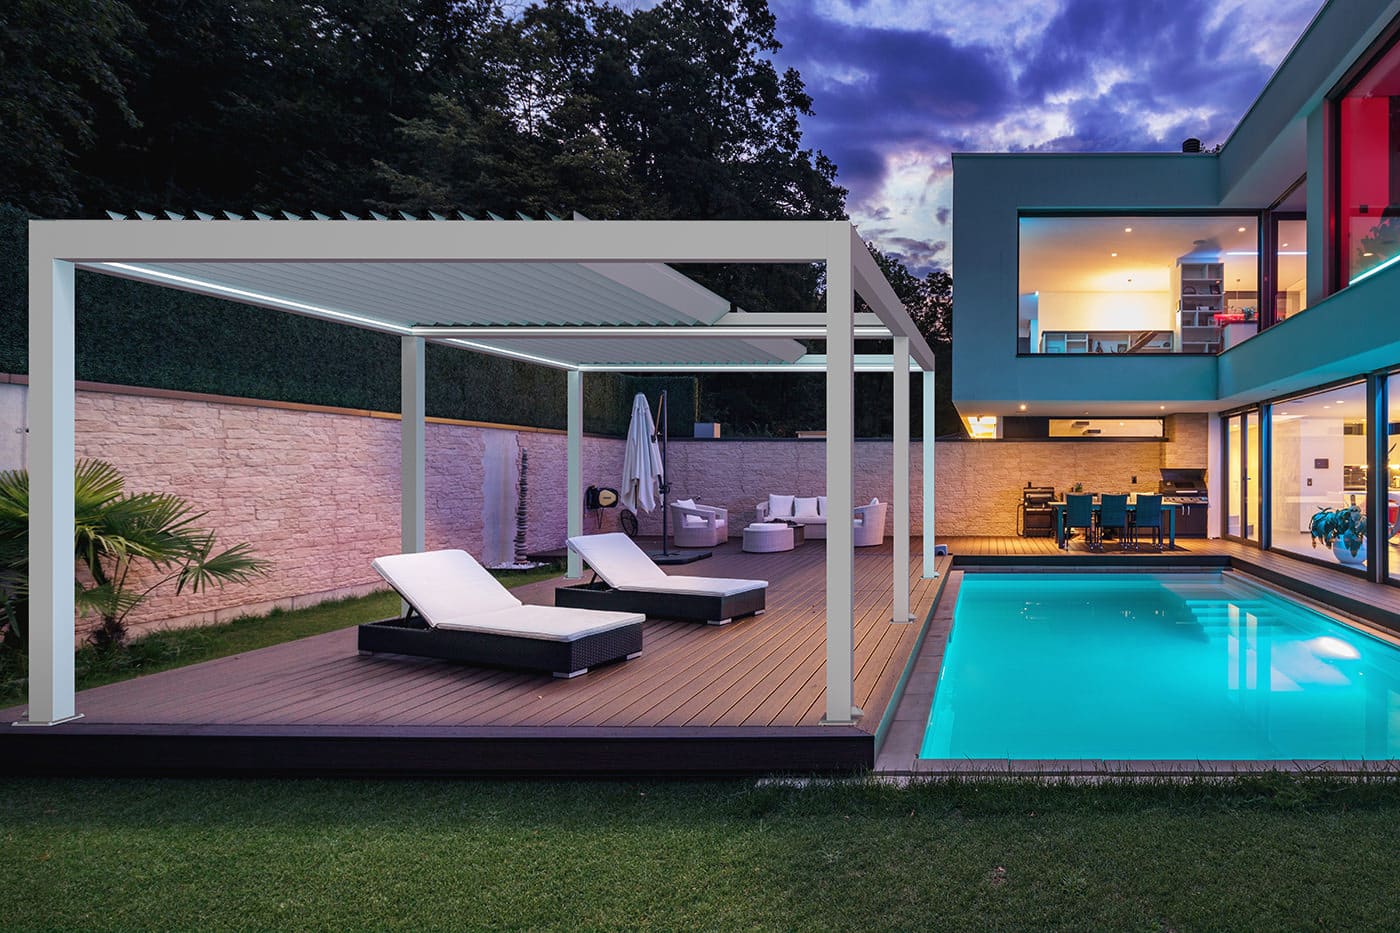 Home pergola with swimming pool installed with Luxaflex Retractable Awnings.